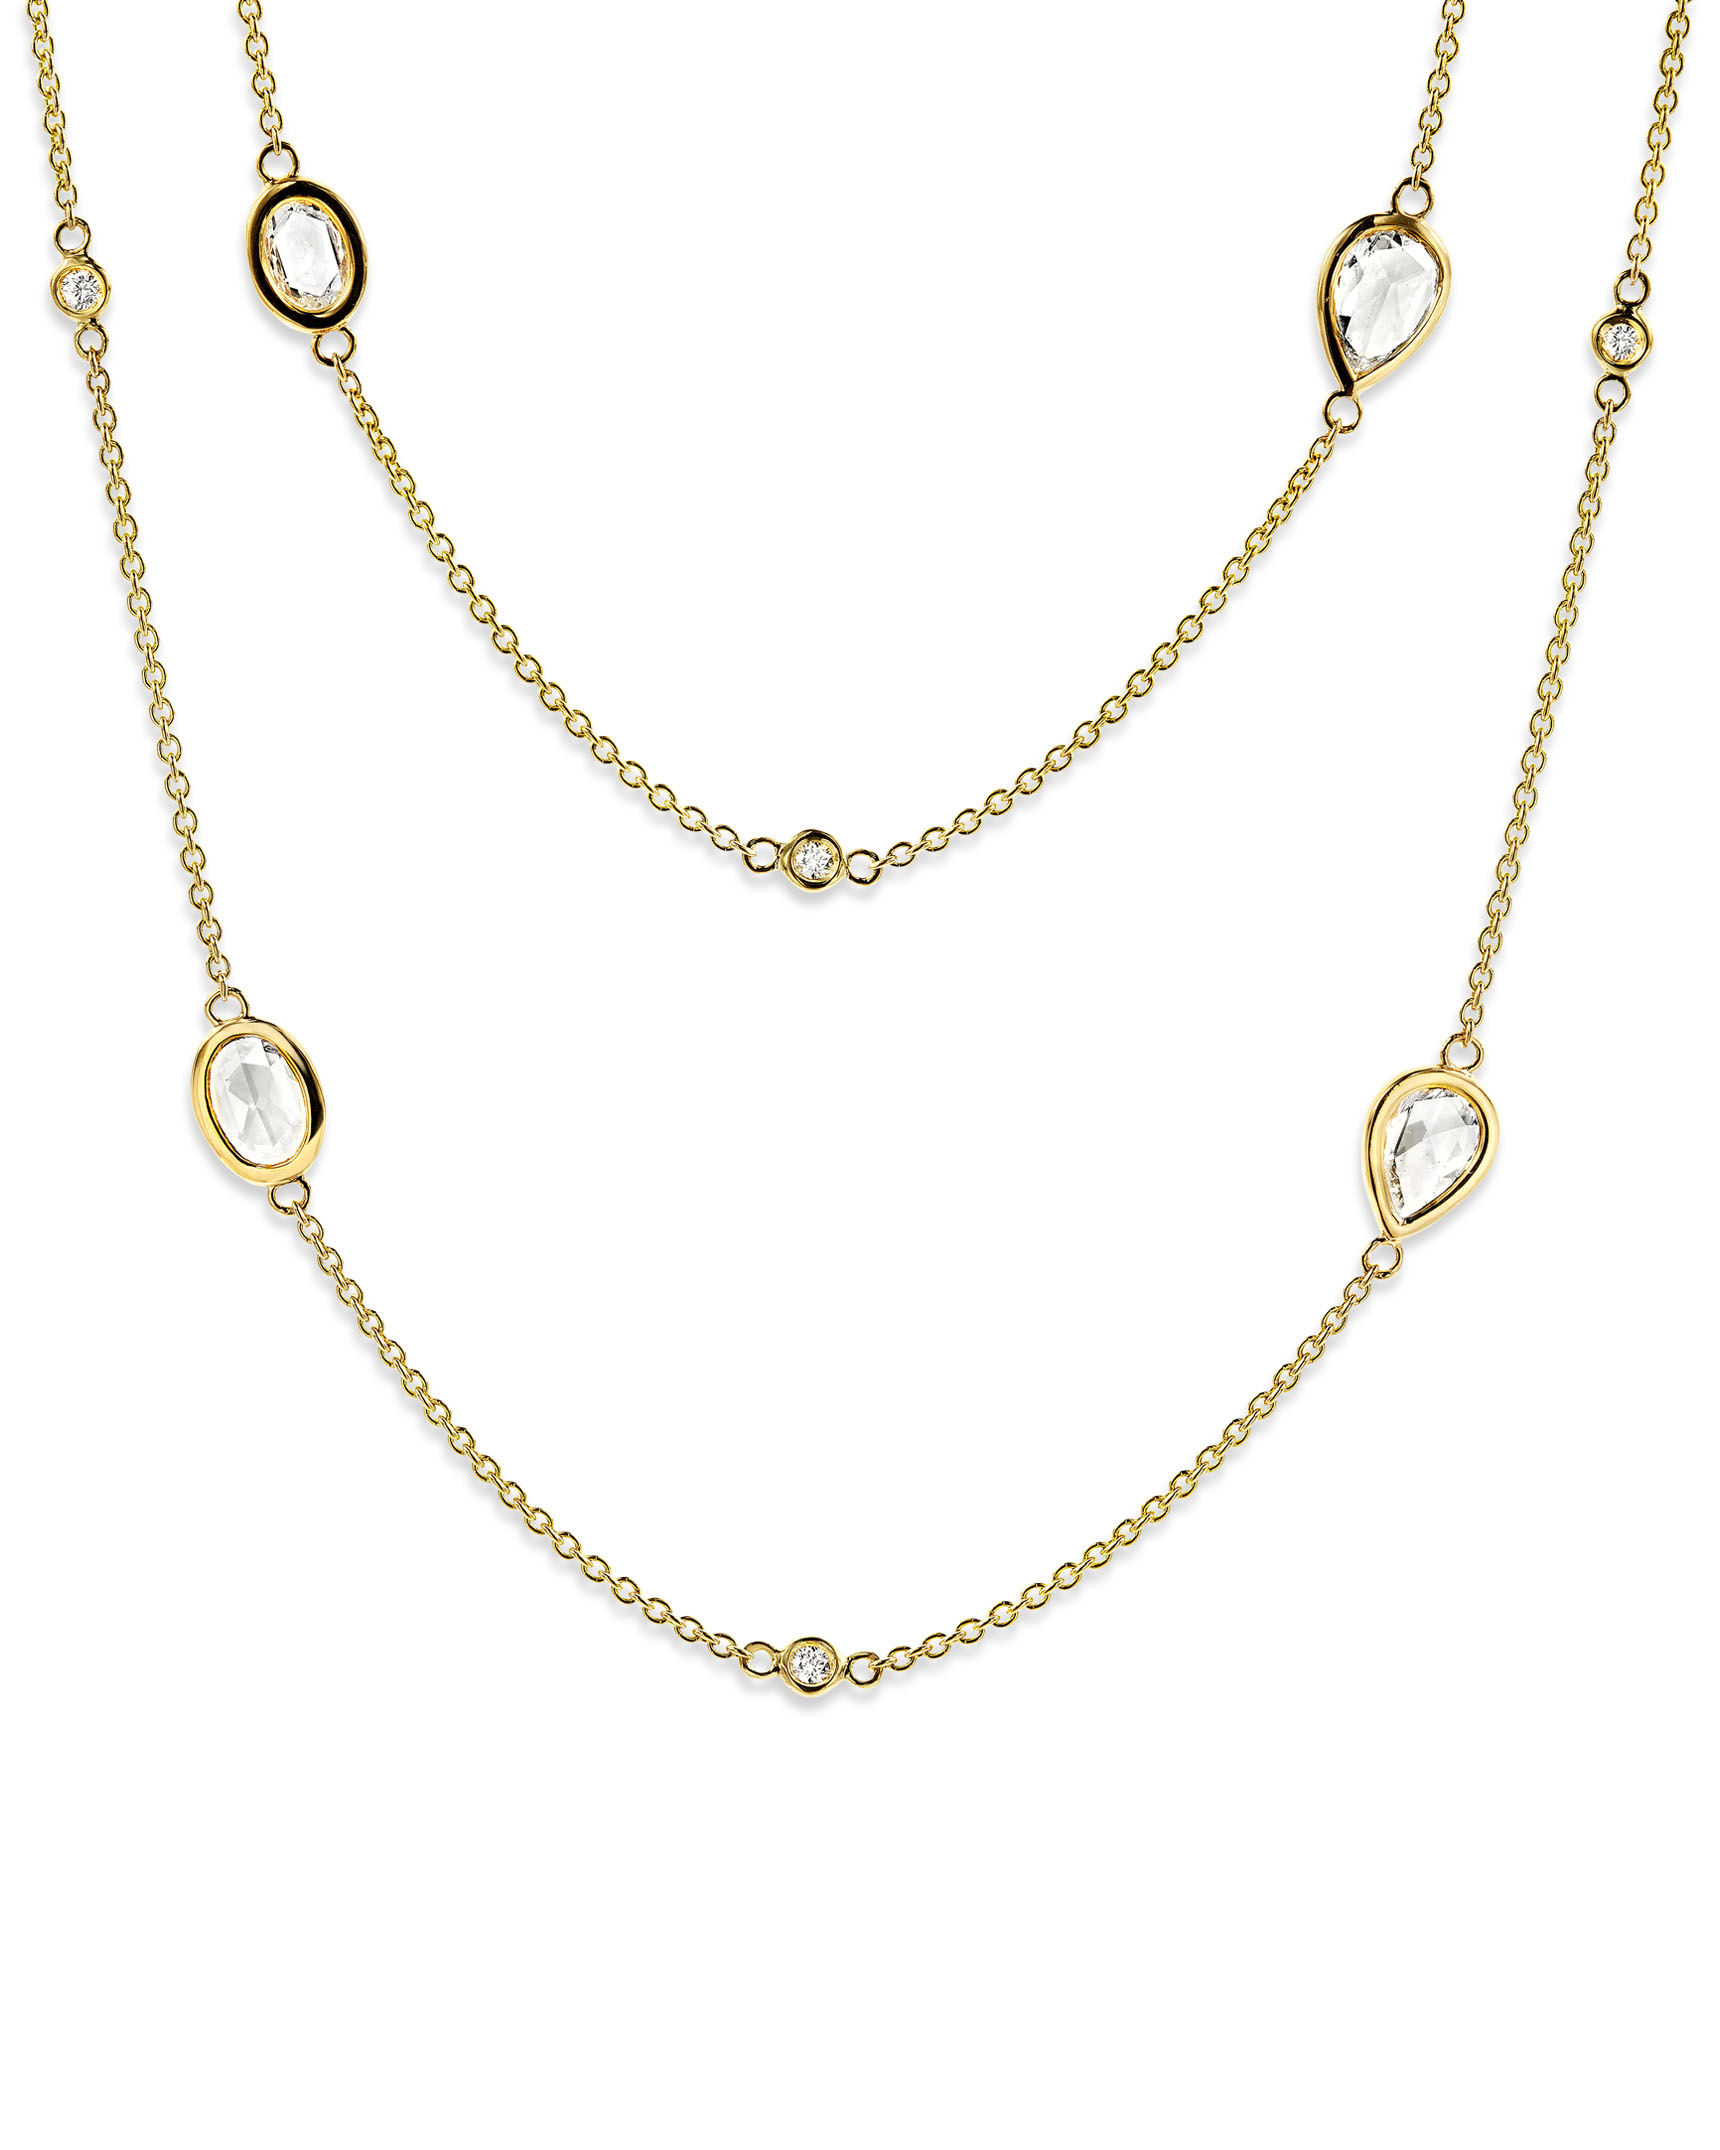 Mixed Shapes Diamond Pendant Necklace 14K Yellow Gold / Pear